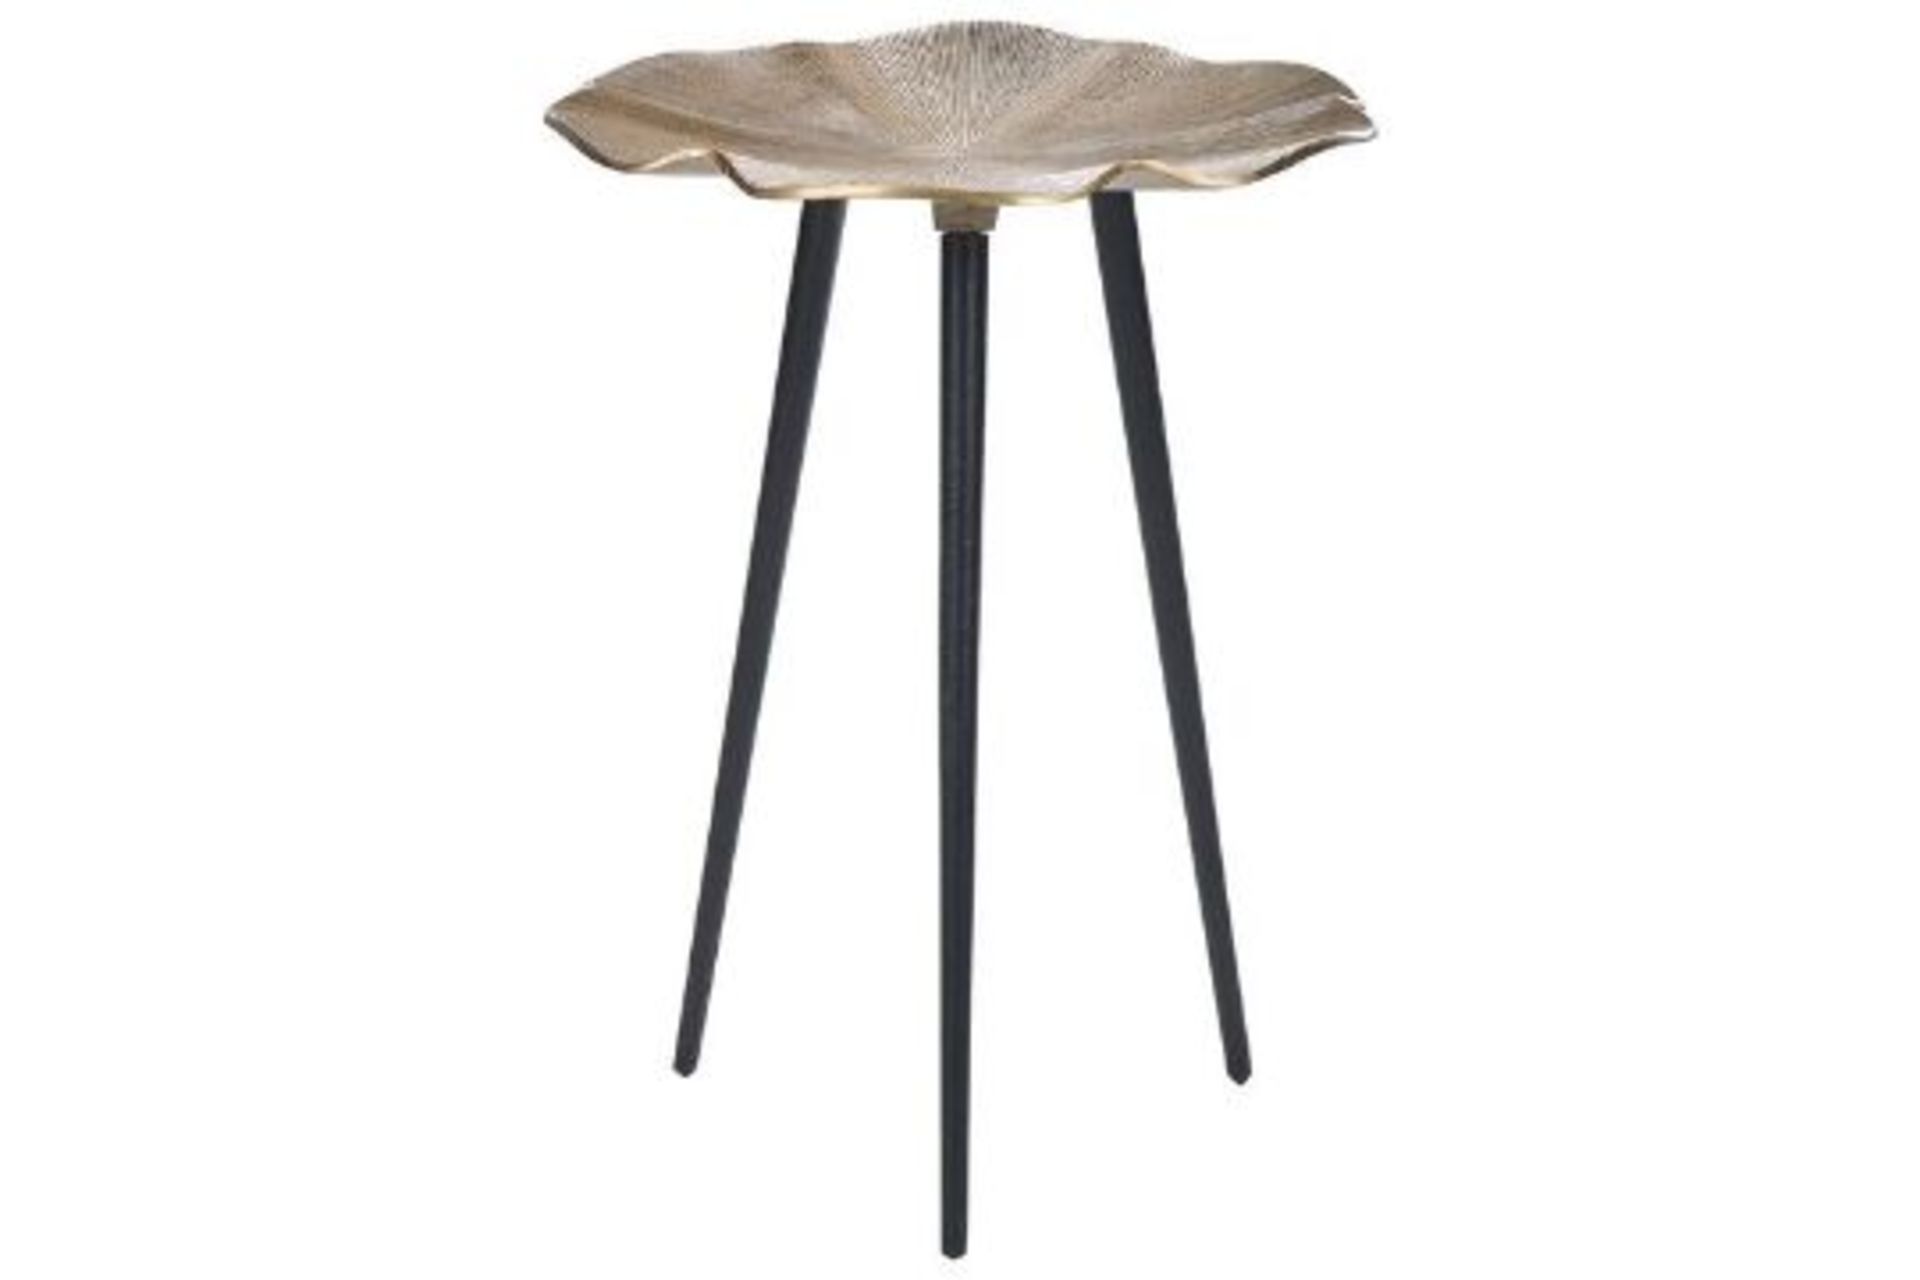 Pudur Metal Side Table Gold with Black 47/12. - ER24. RRP £169.99. Thanks to its unique shape, mixed